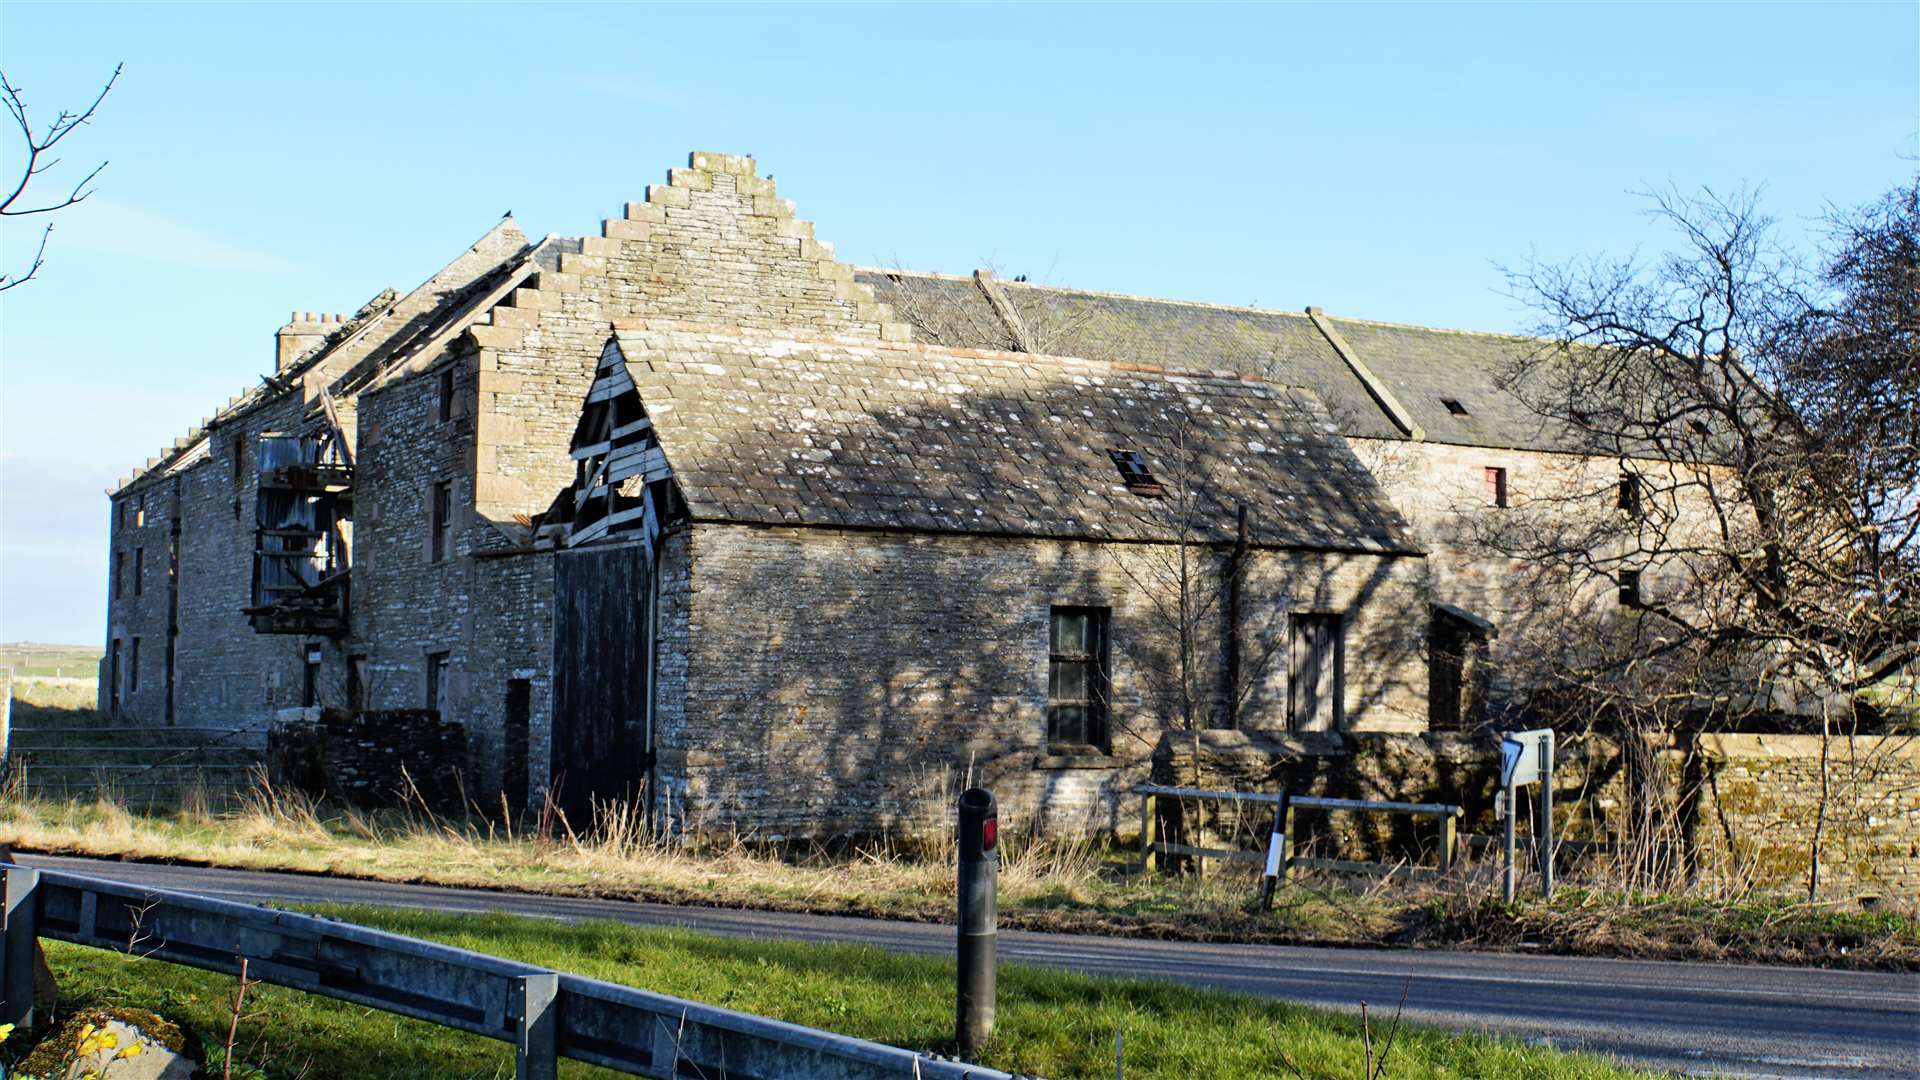 The old mill on the outskirts of Castletown is set to become a whisky distillery and visitor centre